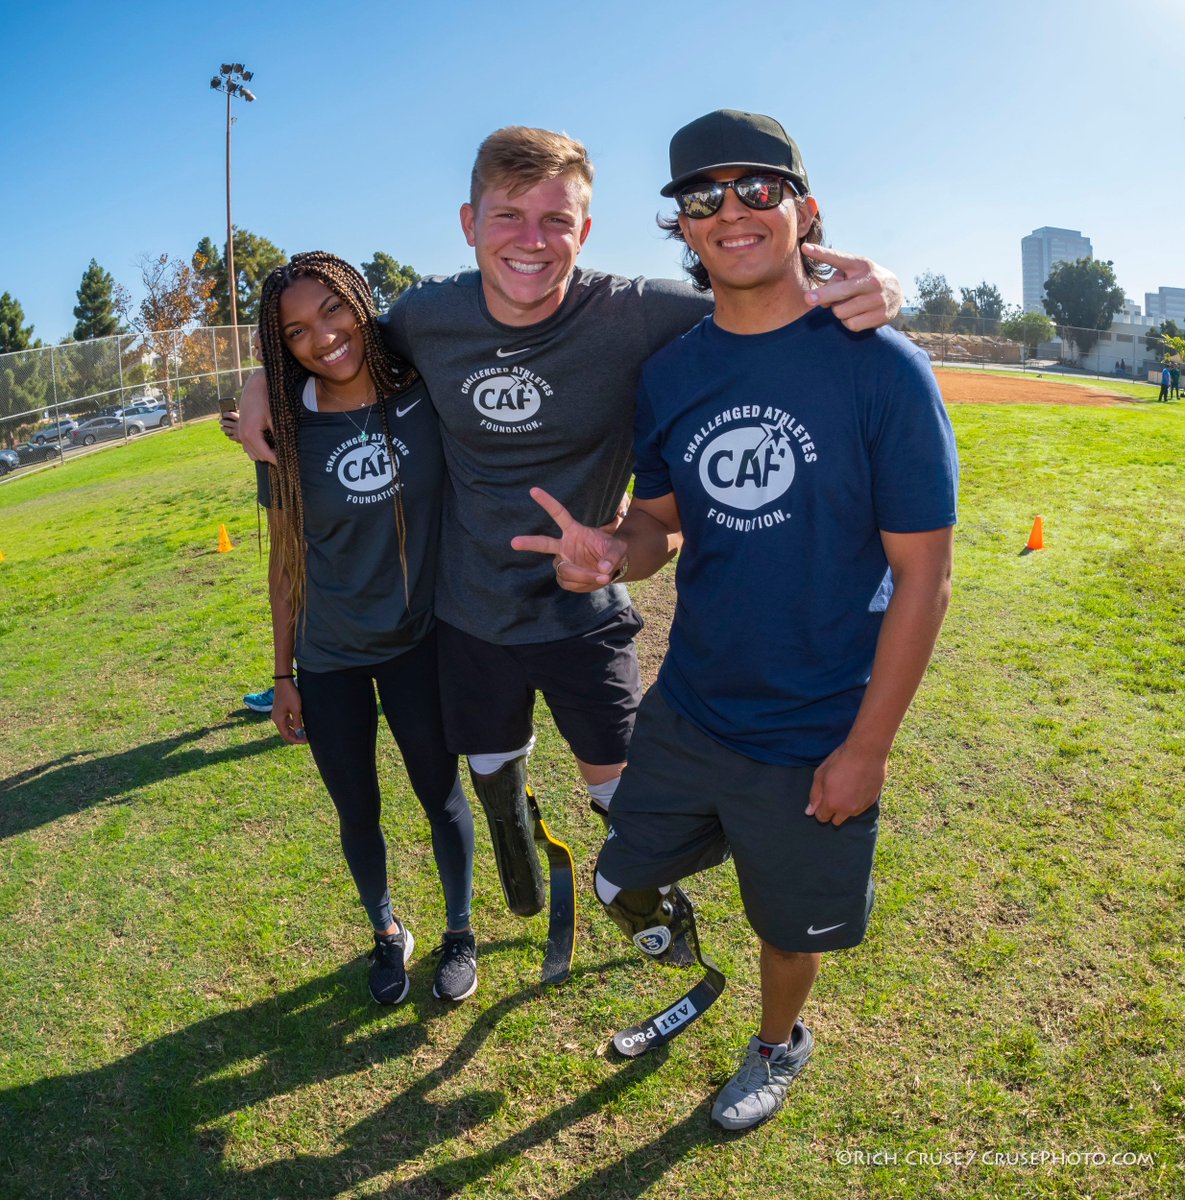 Imagine being mentored by track superstars like @hunterwoodhall and @tar___ruh!  Great to see you both at the @CAFoundation @OssurCorp Running Clinic! #LifeWithoutLimitations #TeamUSA #TeamCAF